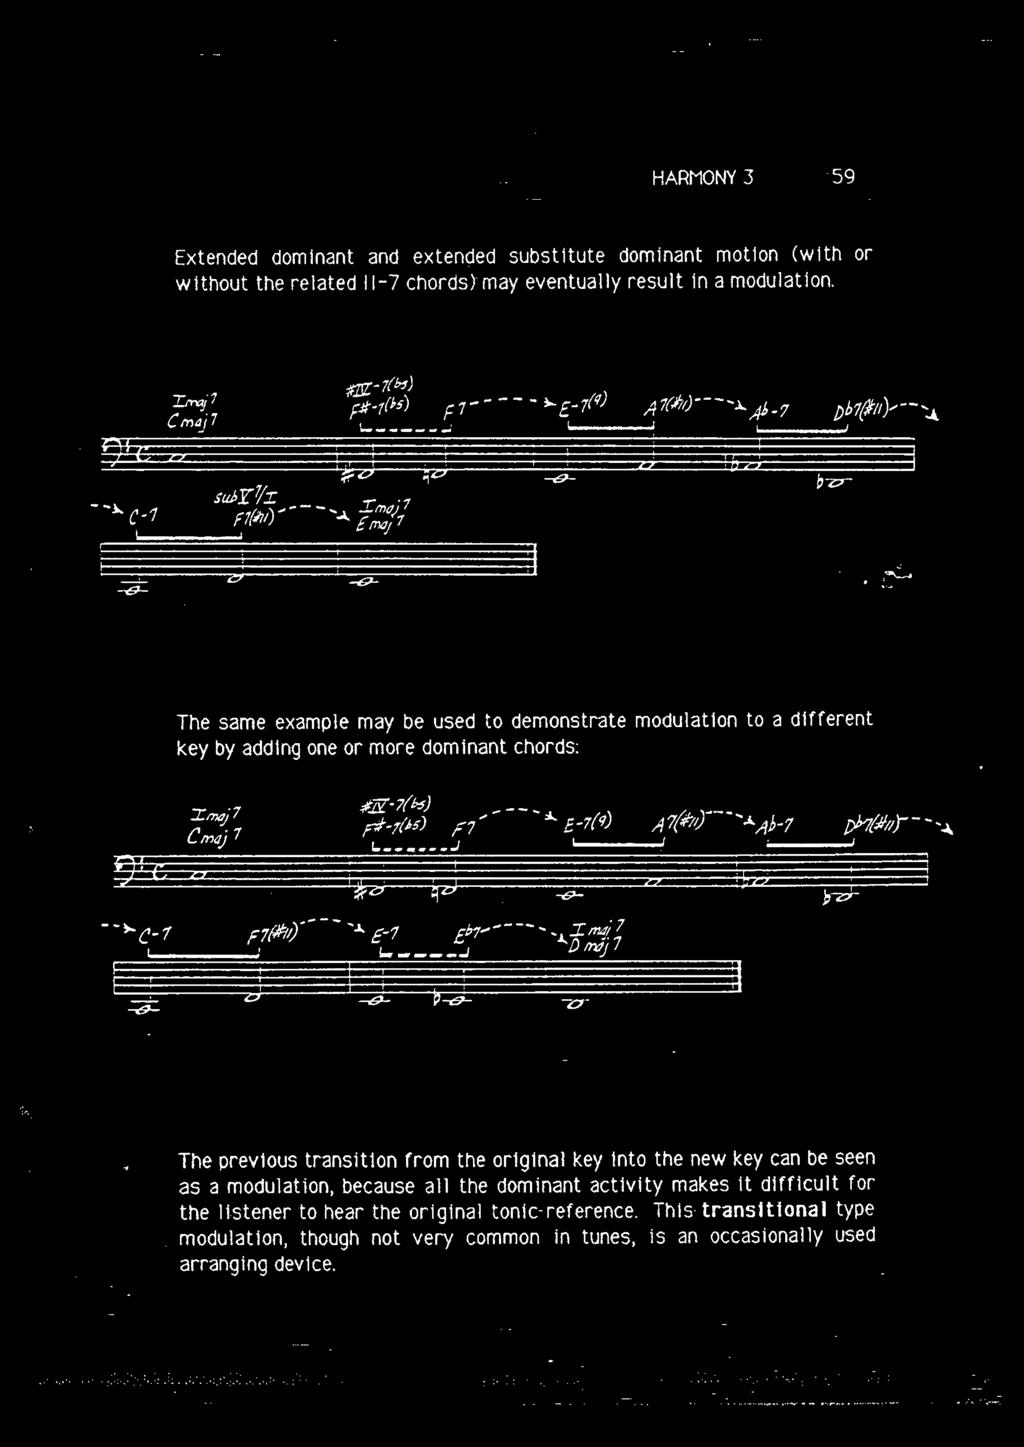 different The previous transition from the original key Into the new key can be seen as a modulation, because all the dominant activity makes it difficult